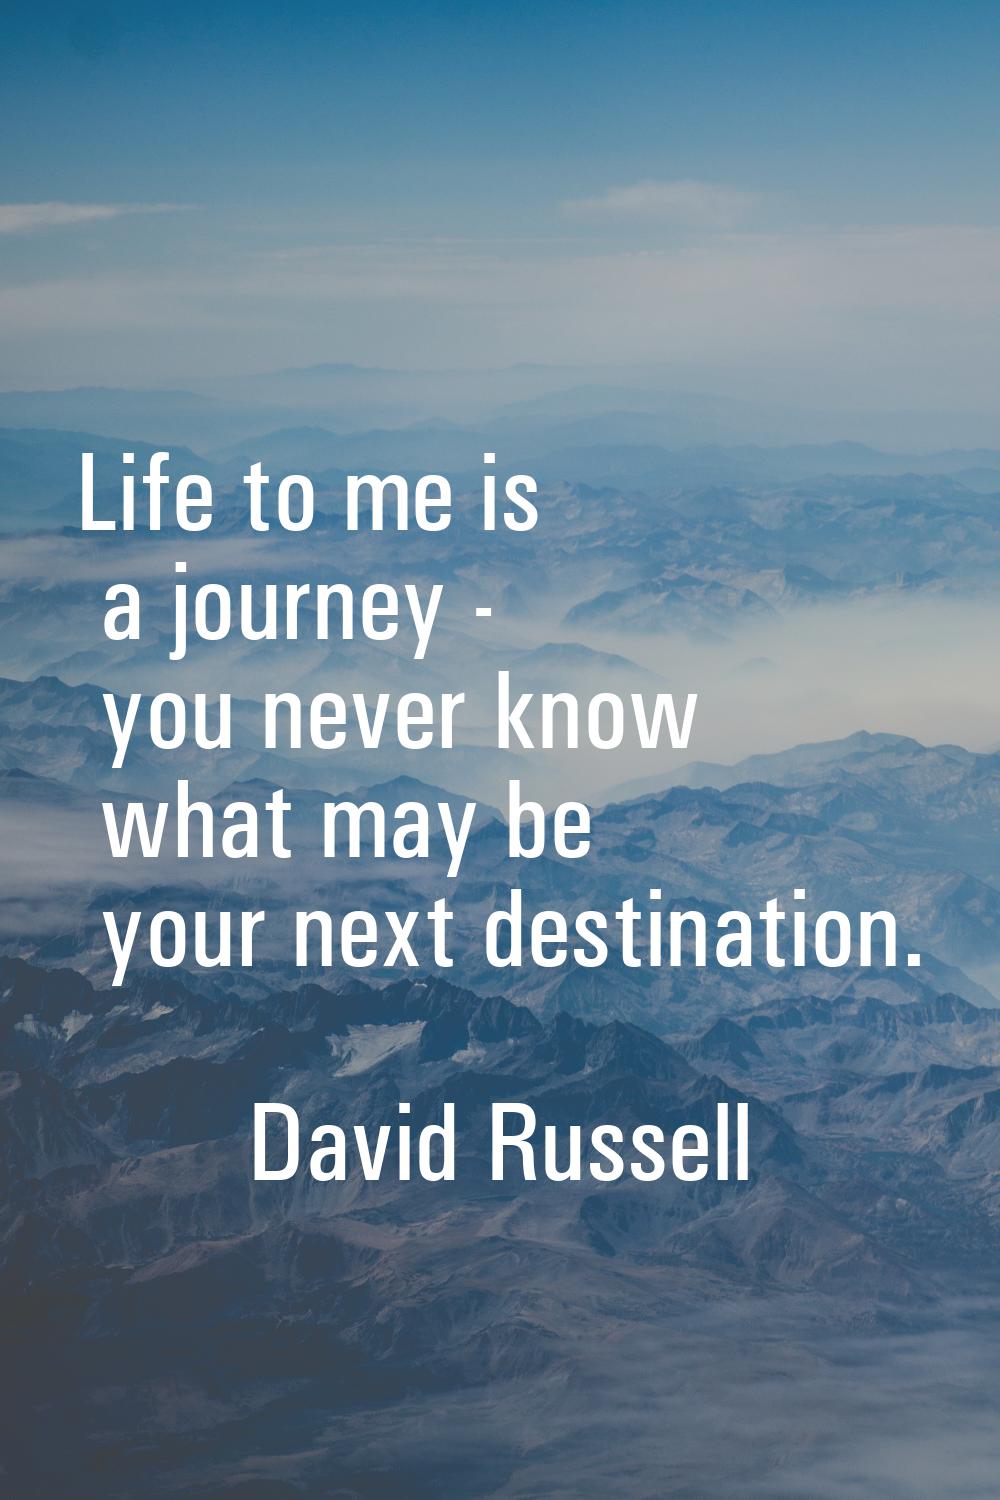 Life to me is a journey - you never know what may be your next destination.